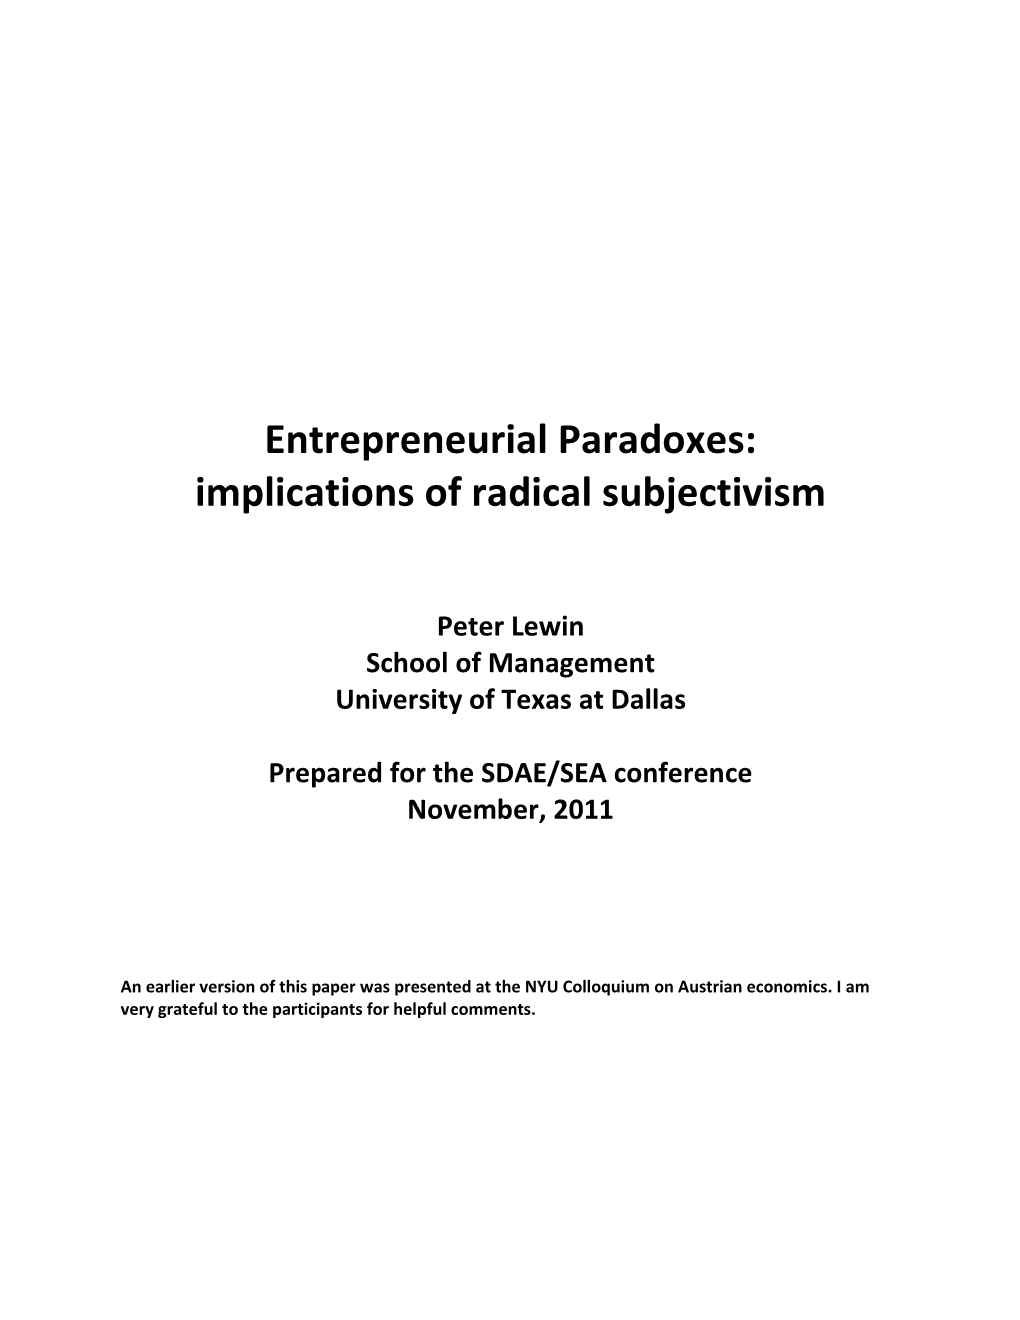 Entrepreneurial Paradoxes: Implications of Radical Subjectivism